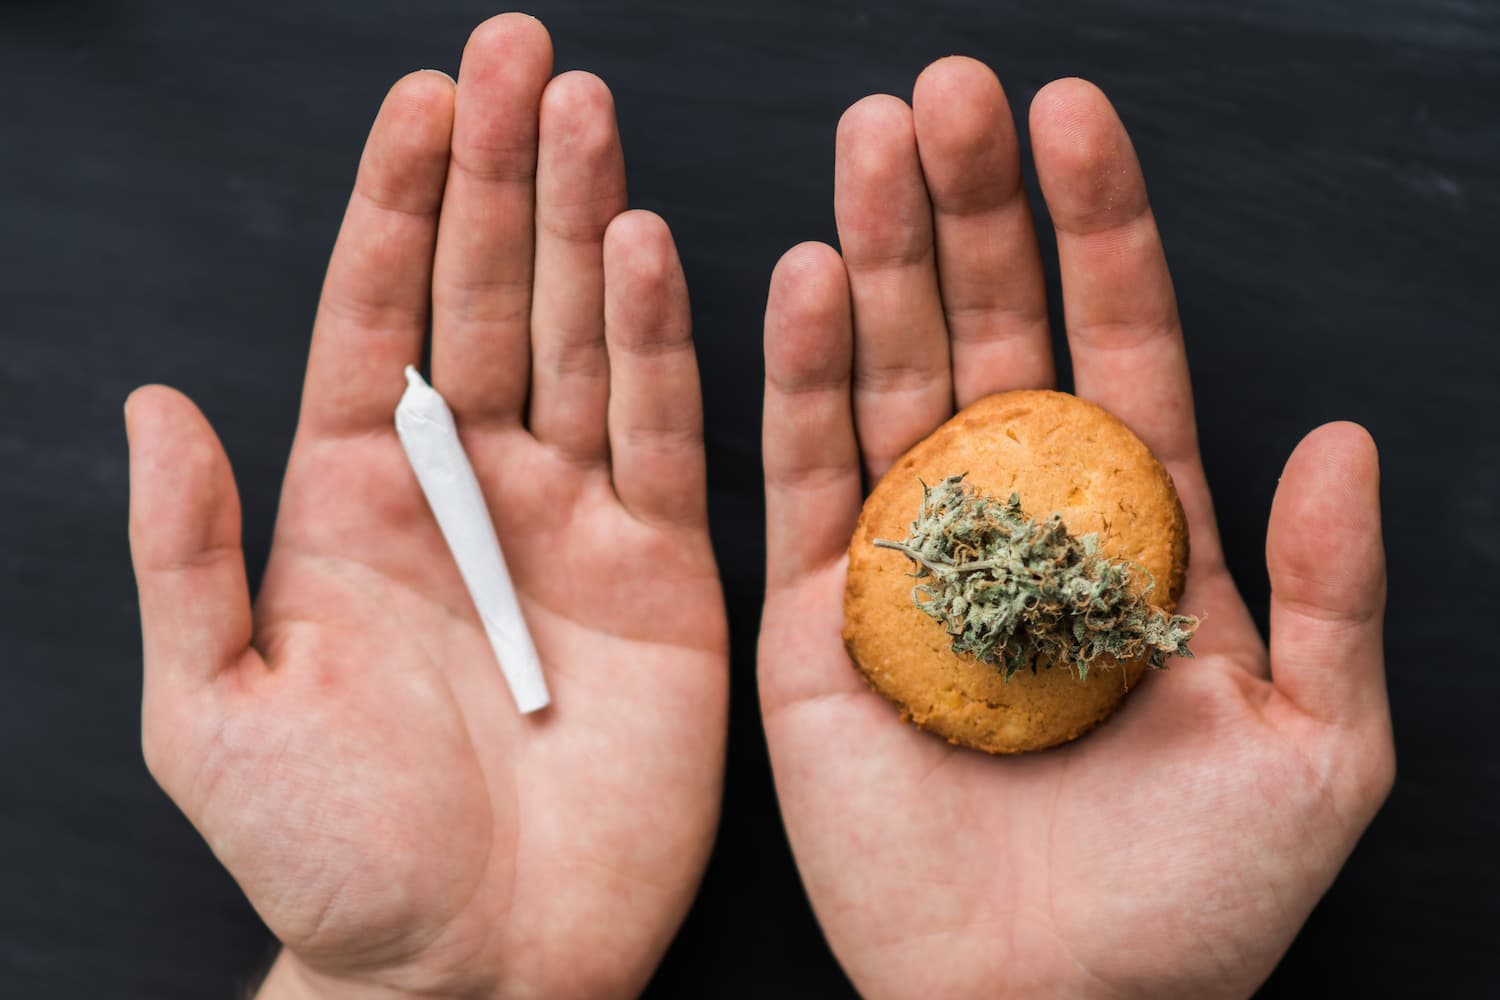 an image of two hands face up, one holding a marijuana joint and the other one holding an edible marijuana cookie